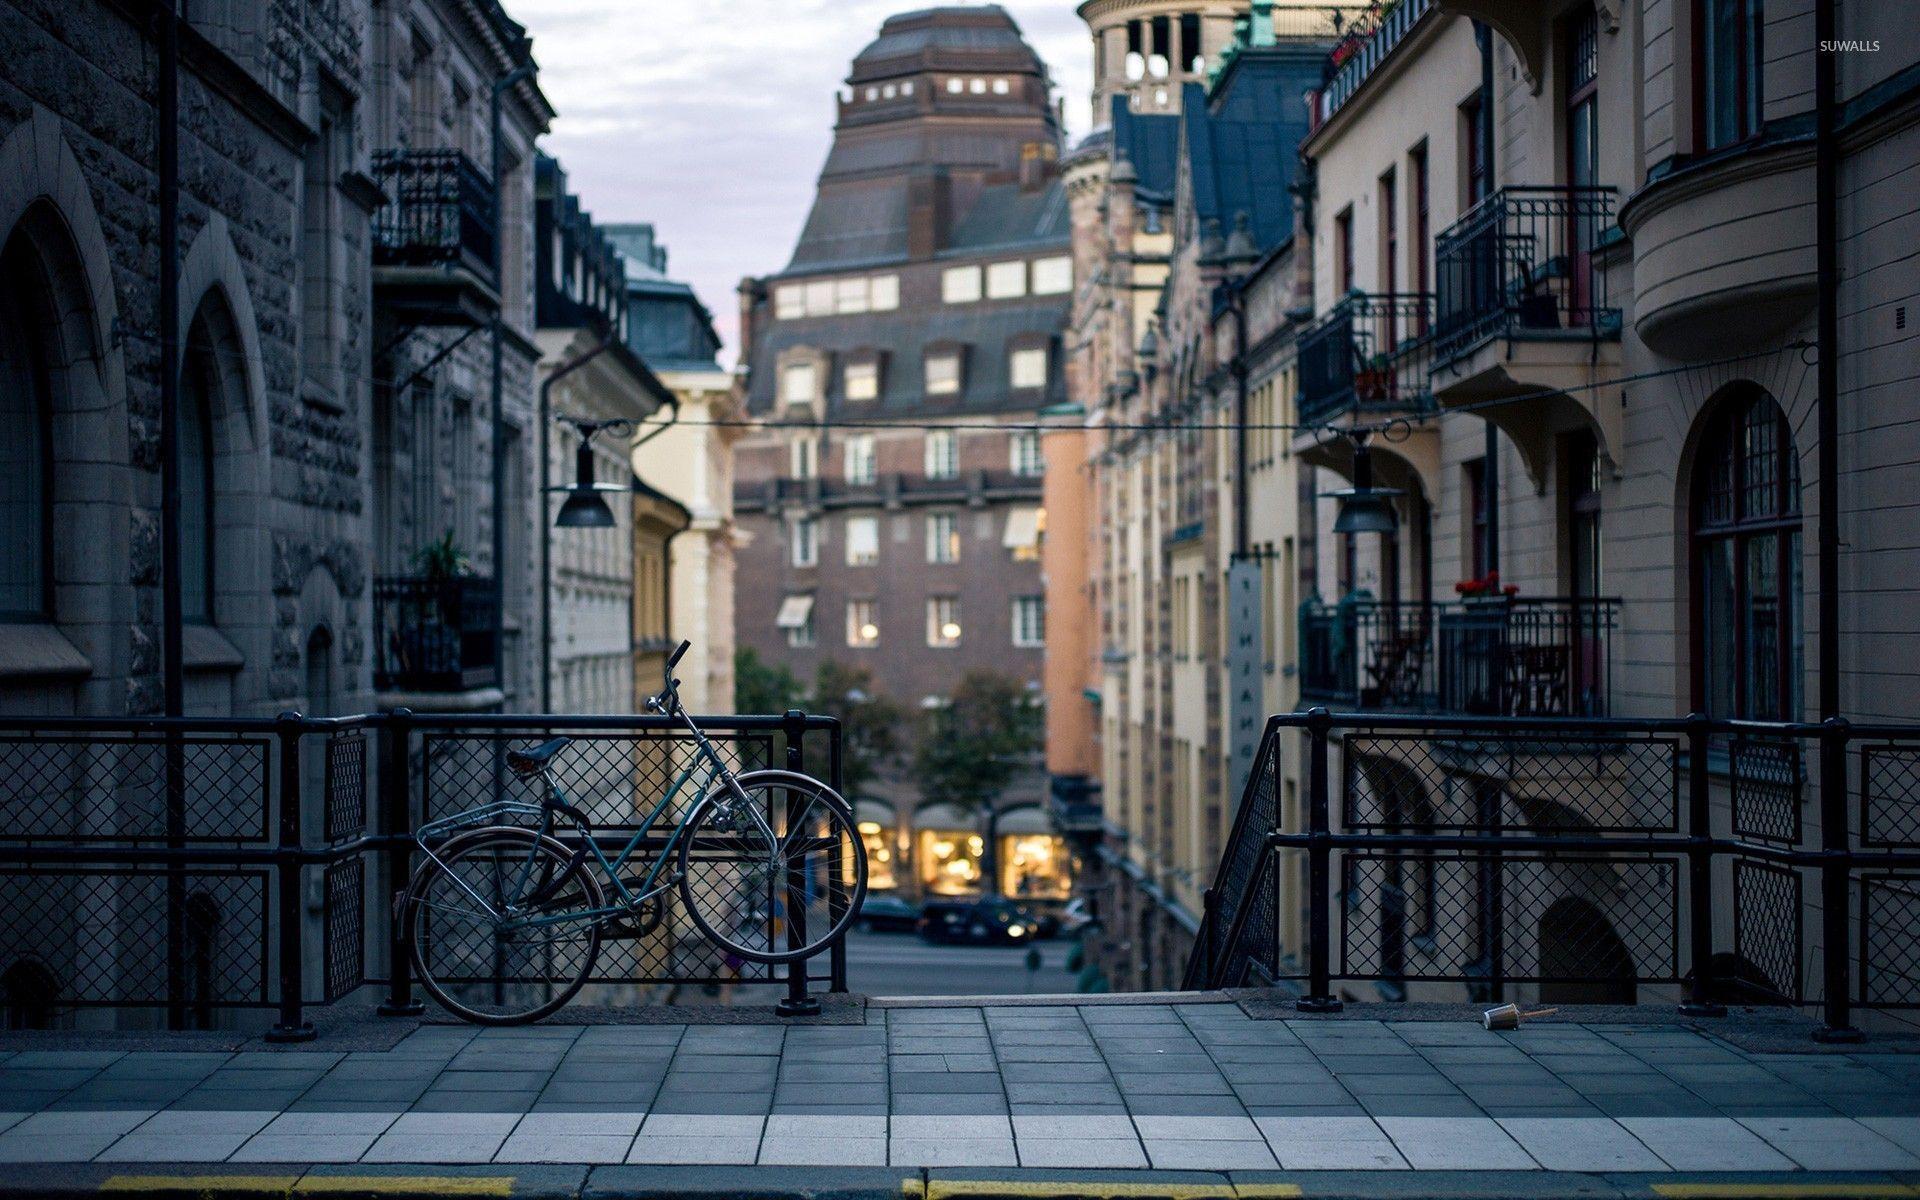 Bicycle on a street in Stockholm wallpaper wallpaper